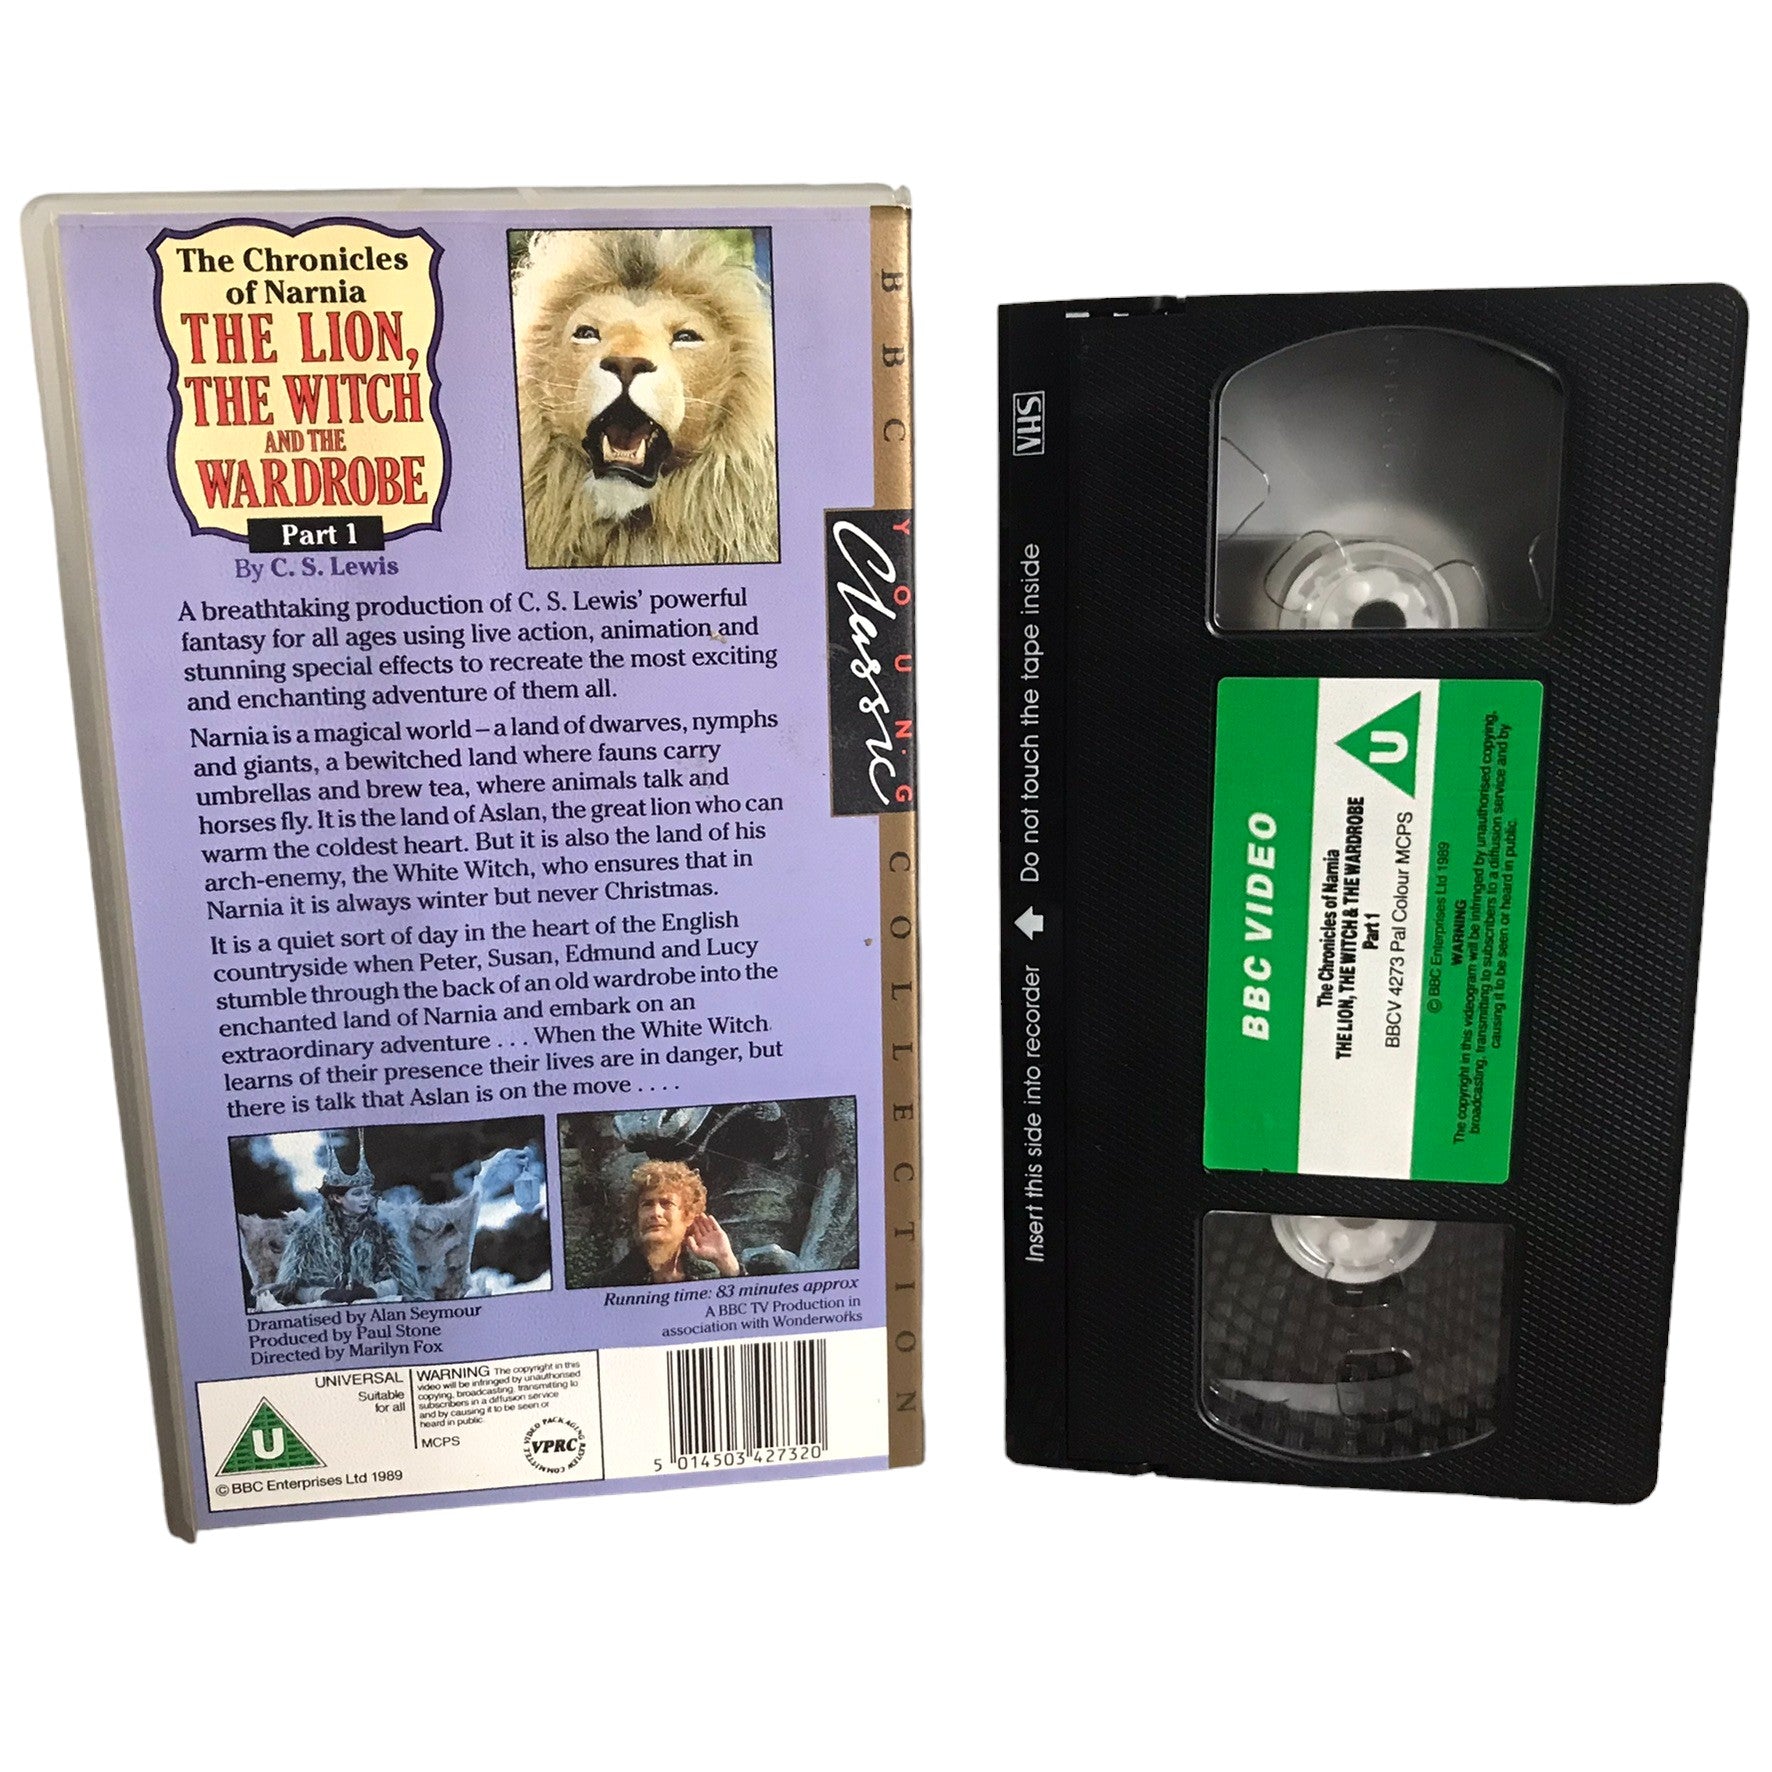 The Chronicles of Narnia The Lion, The Witch and the Wardrobe (Part-1) - William Moseley - BBC Video - Childrens - Pal - VHS-